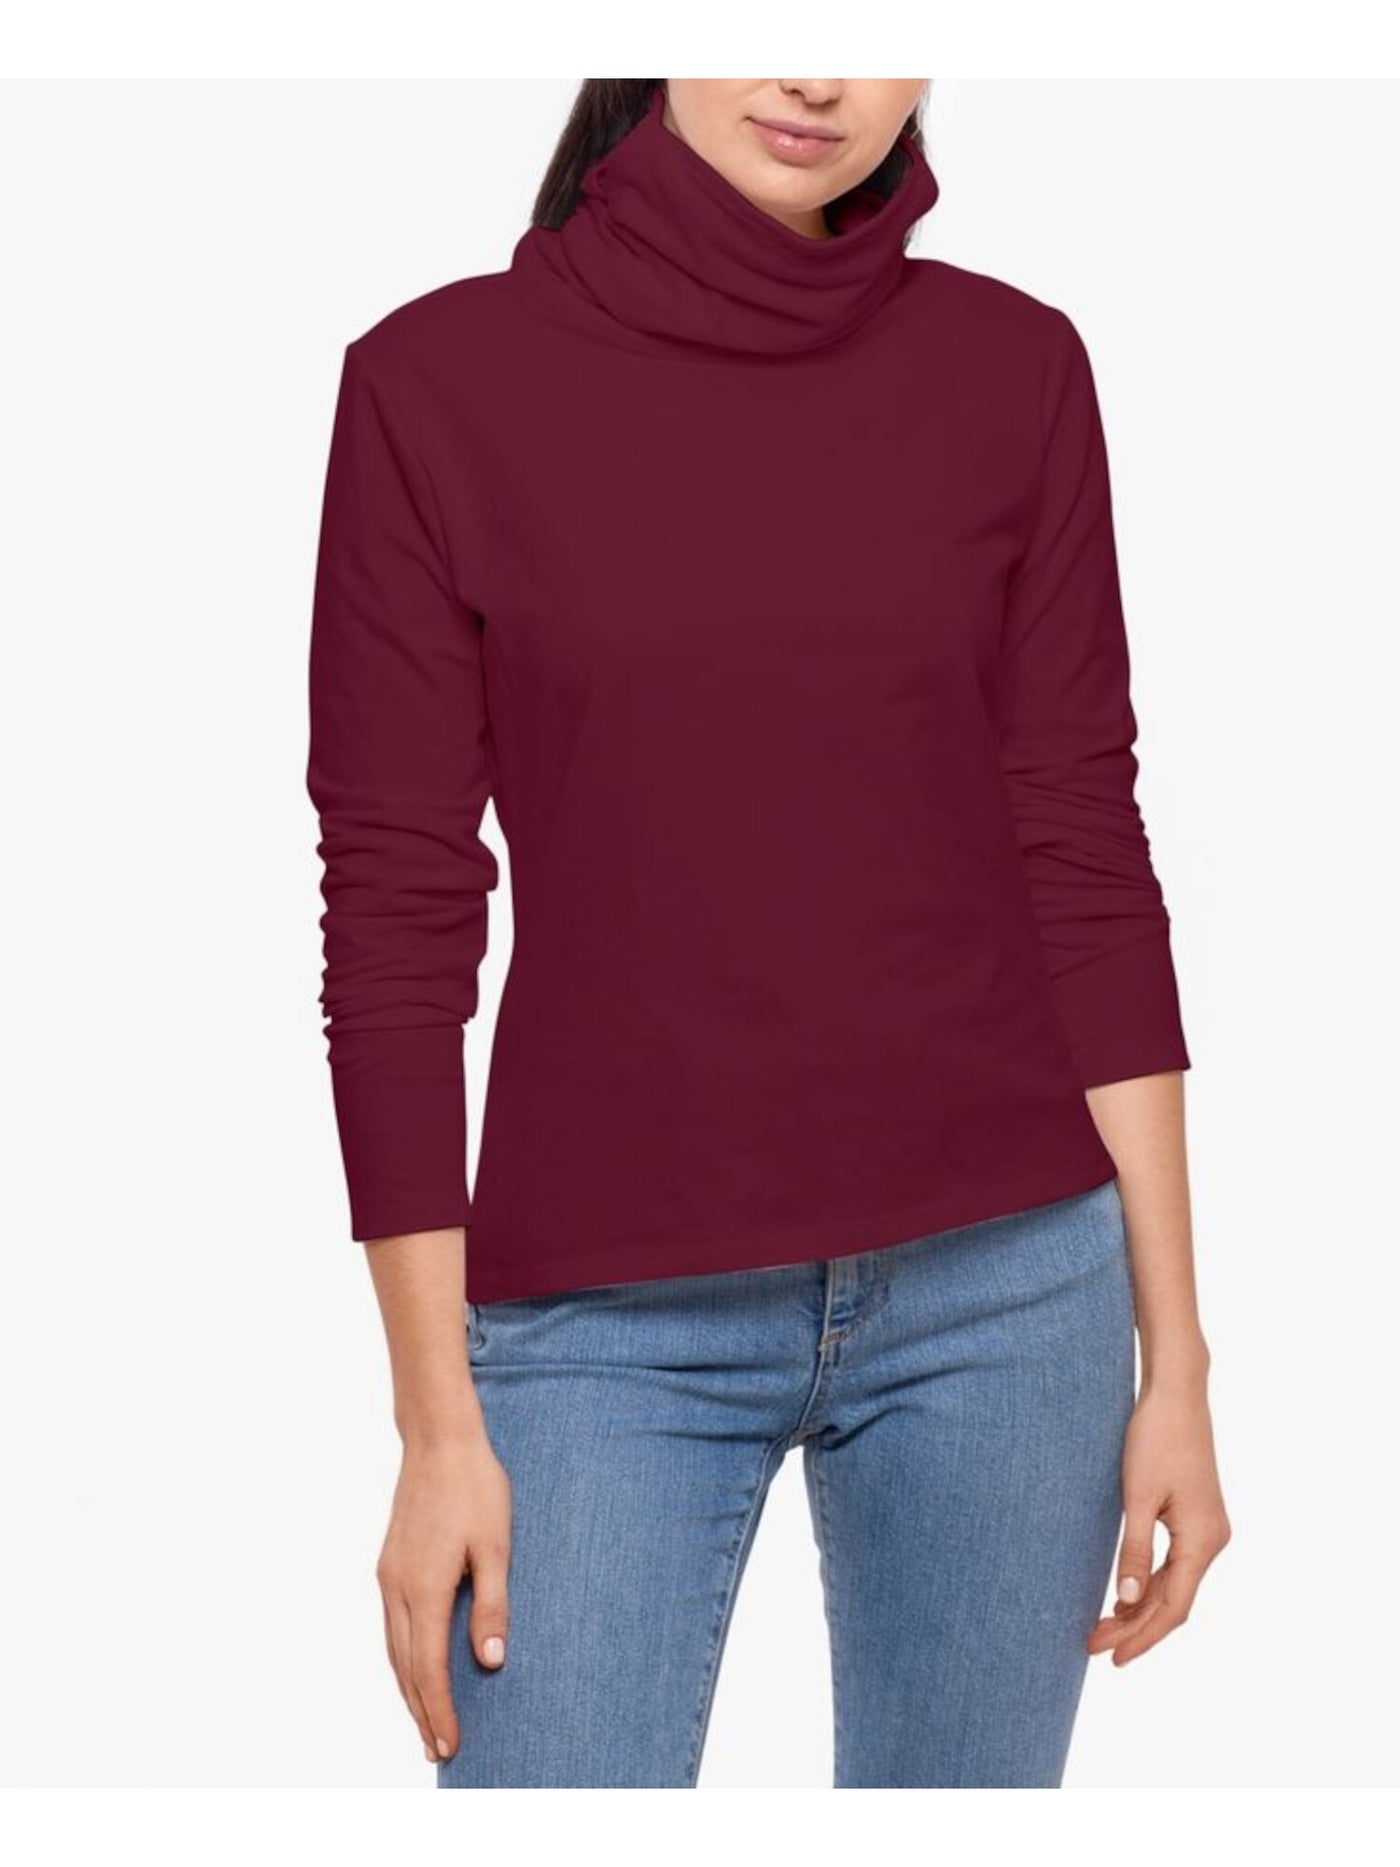 BETSY & ADAM Womens Long Sleeve Turtle Neck Top